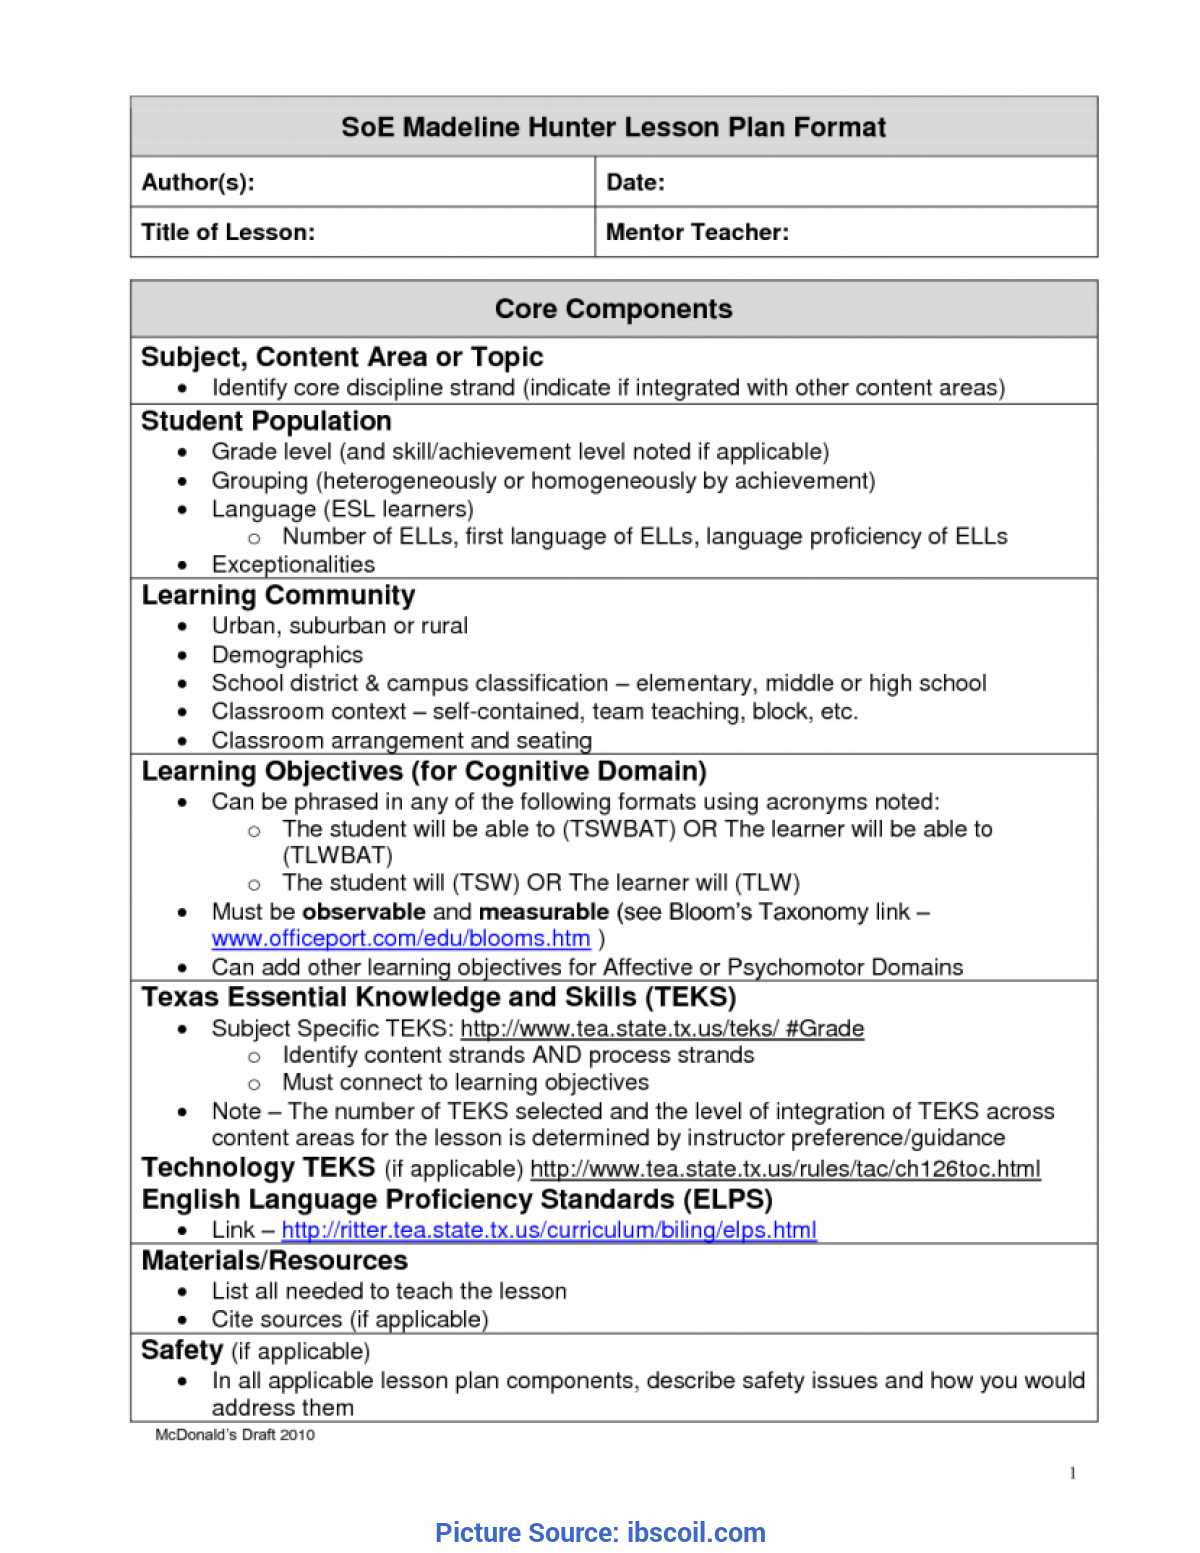 Madeline Hunter Lesson Plan Template Twiroo Com | Lesso Pertaining To Madeline Hunter Lesson Plan Template Blank